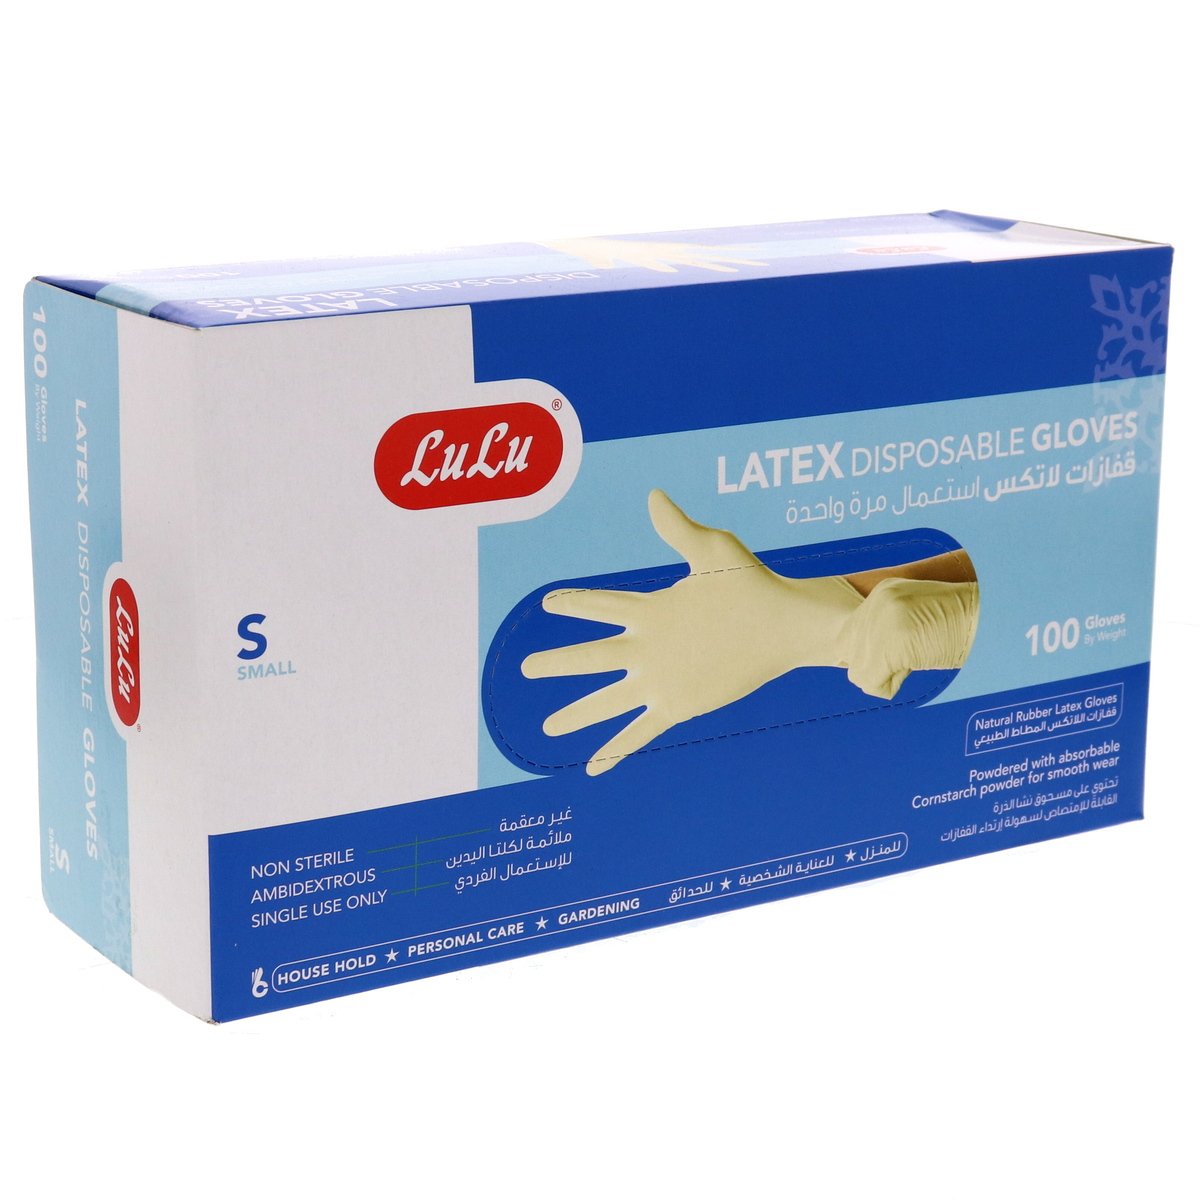 LuLu Latex Disposable Gloves Small 100pcs